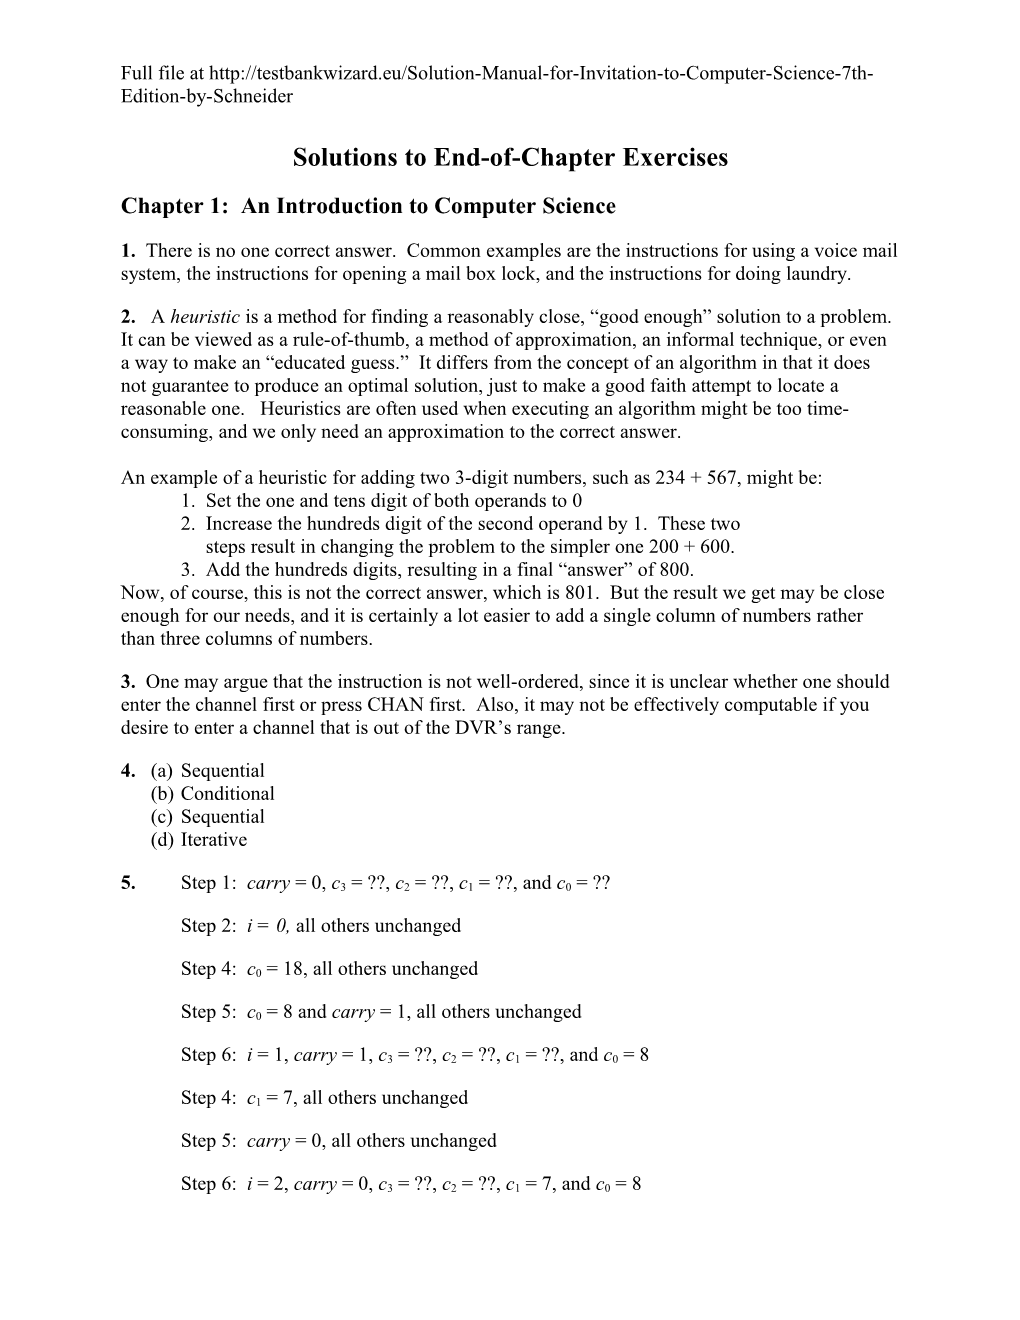 Solutions to End-Of-Chapter Exercises